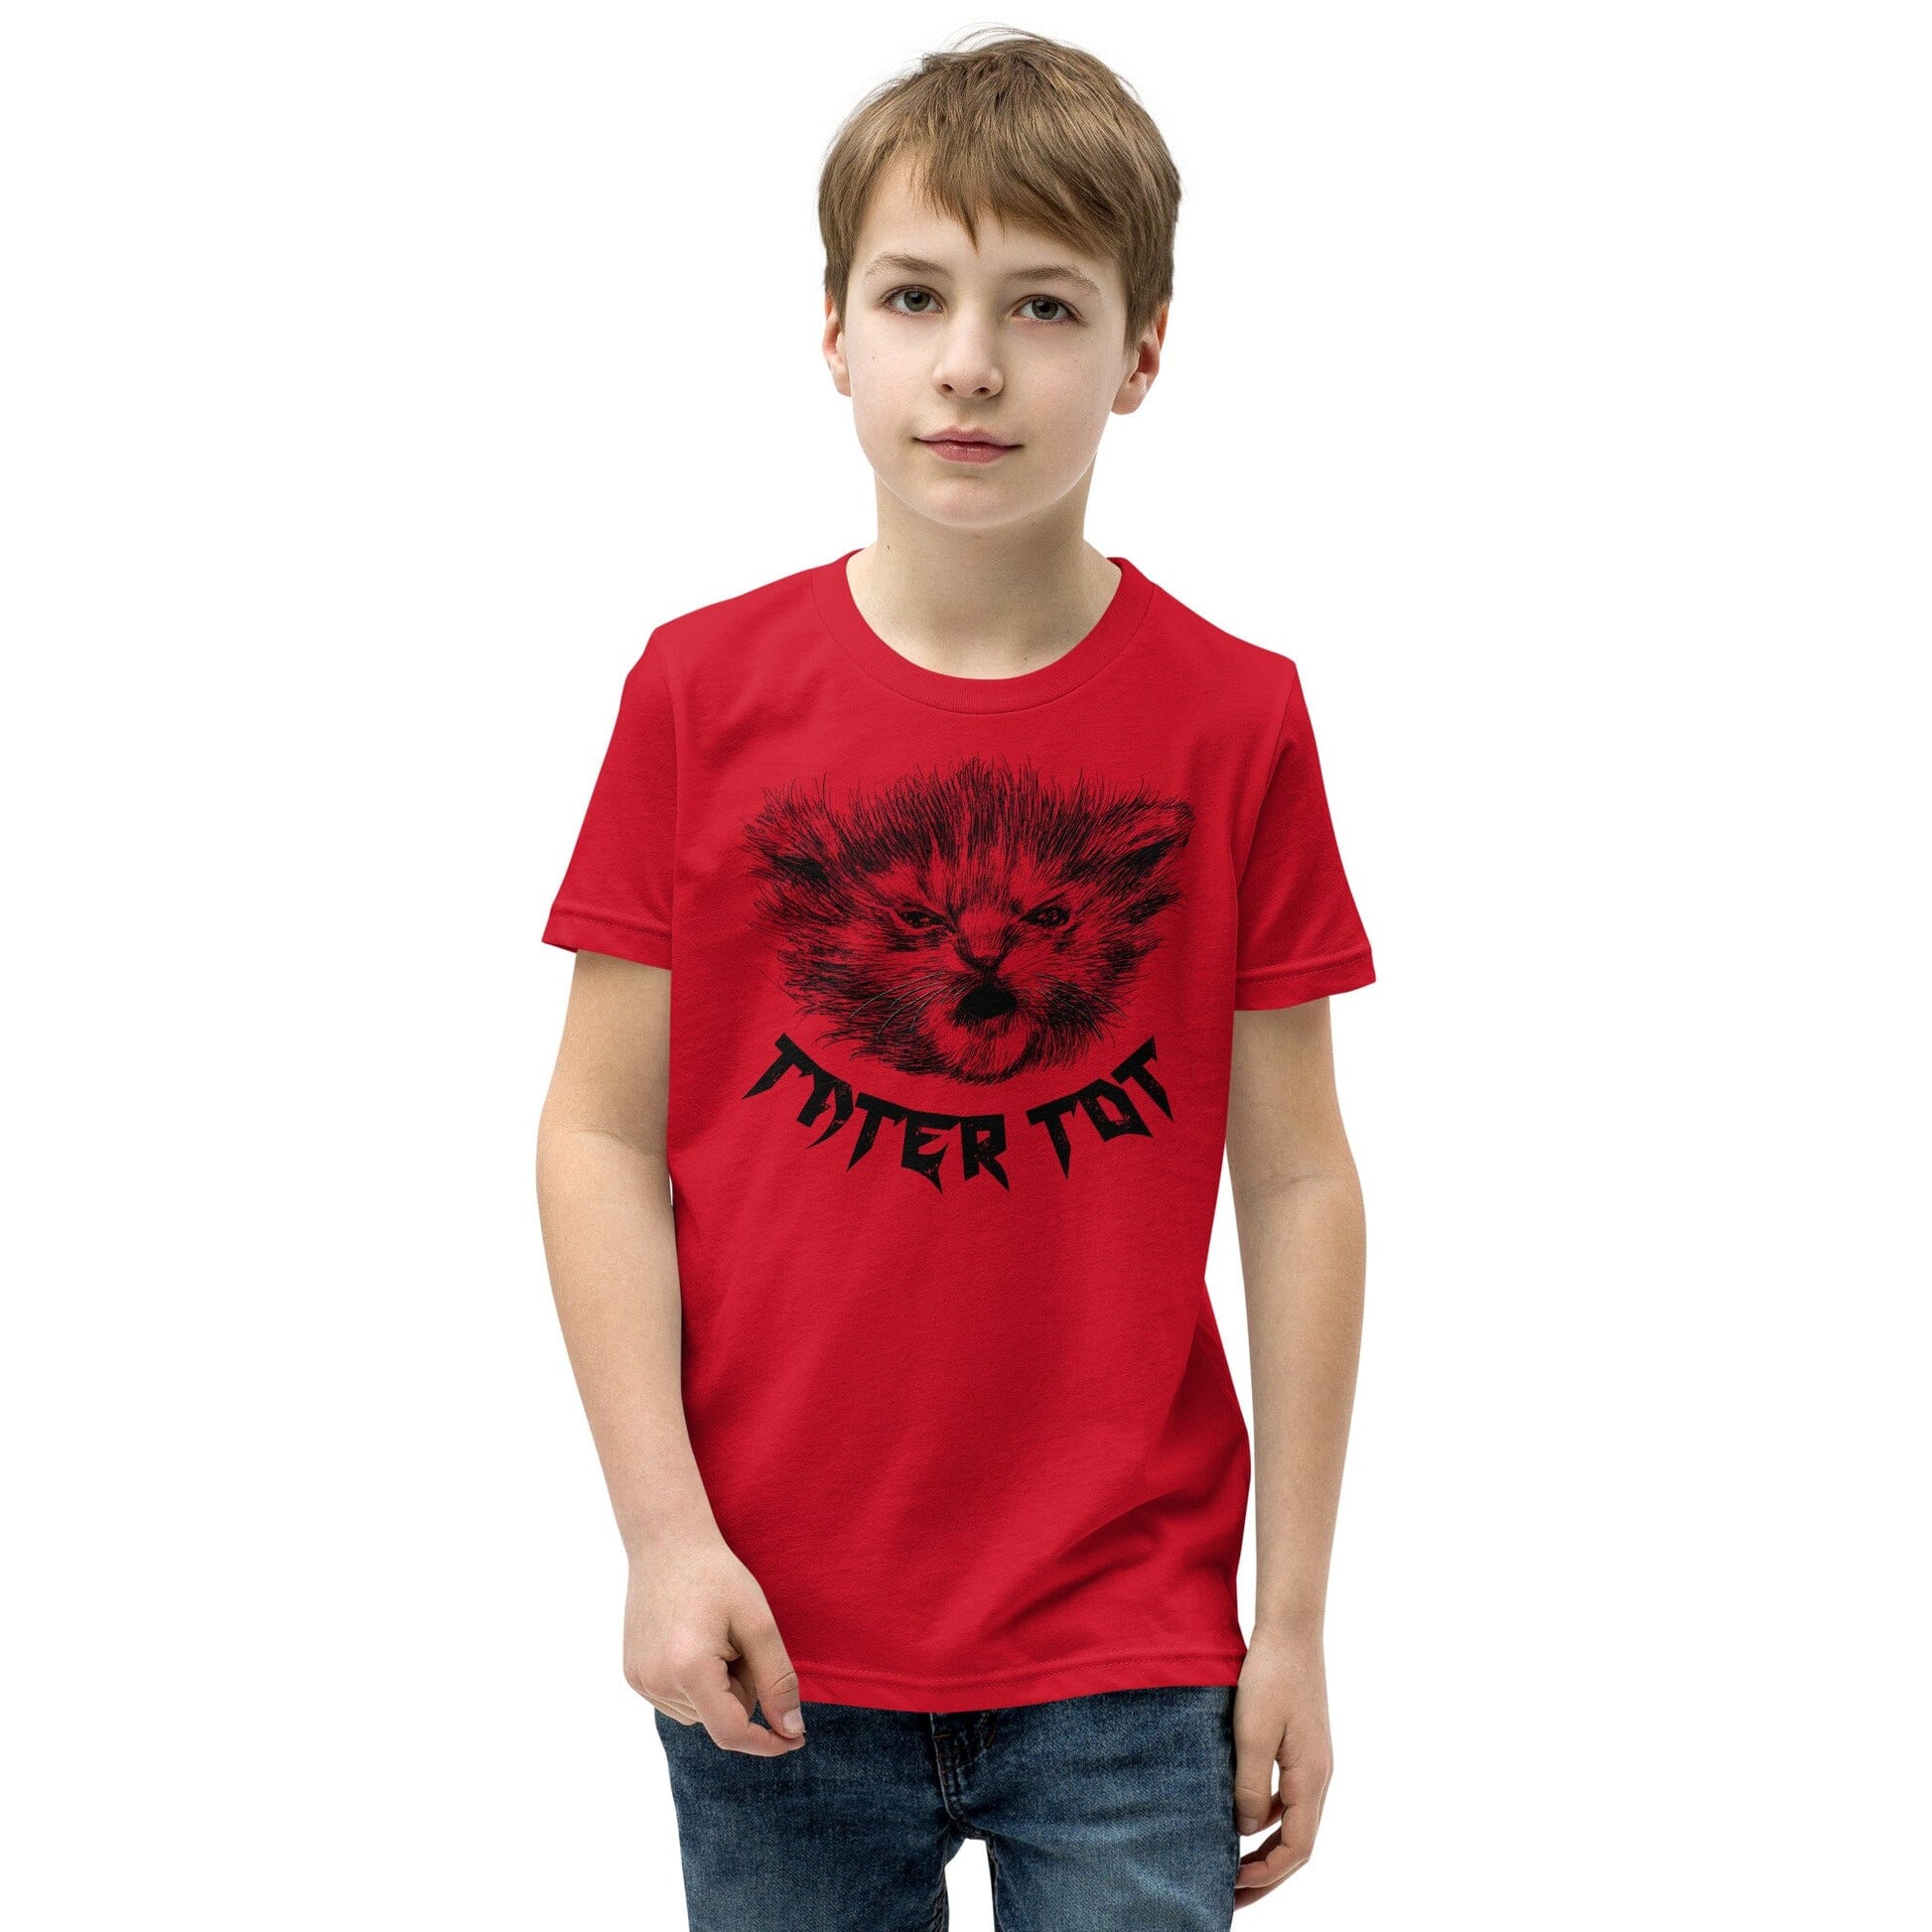 Metal Tater Tot YOUTH T-Shirt [Unfoiled] (All net proceeds go to Kitty CrusAIDe) JoyousJoyfulJoyness Red S 